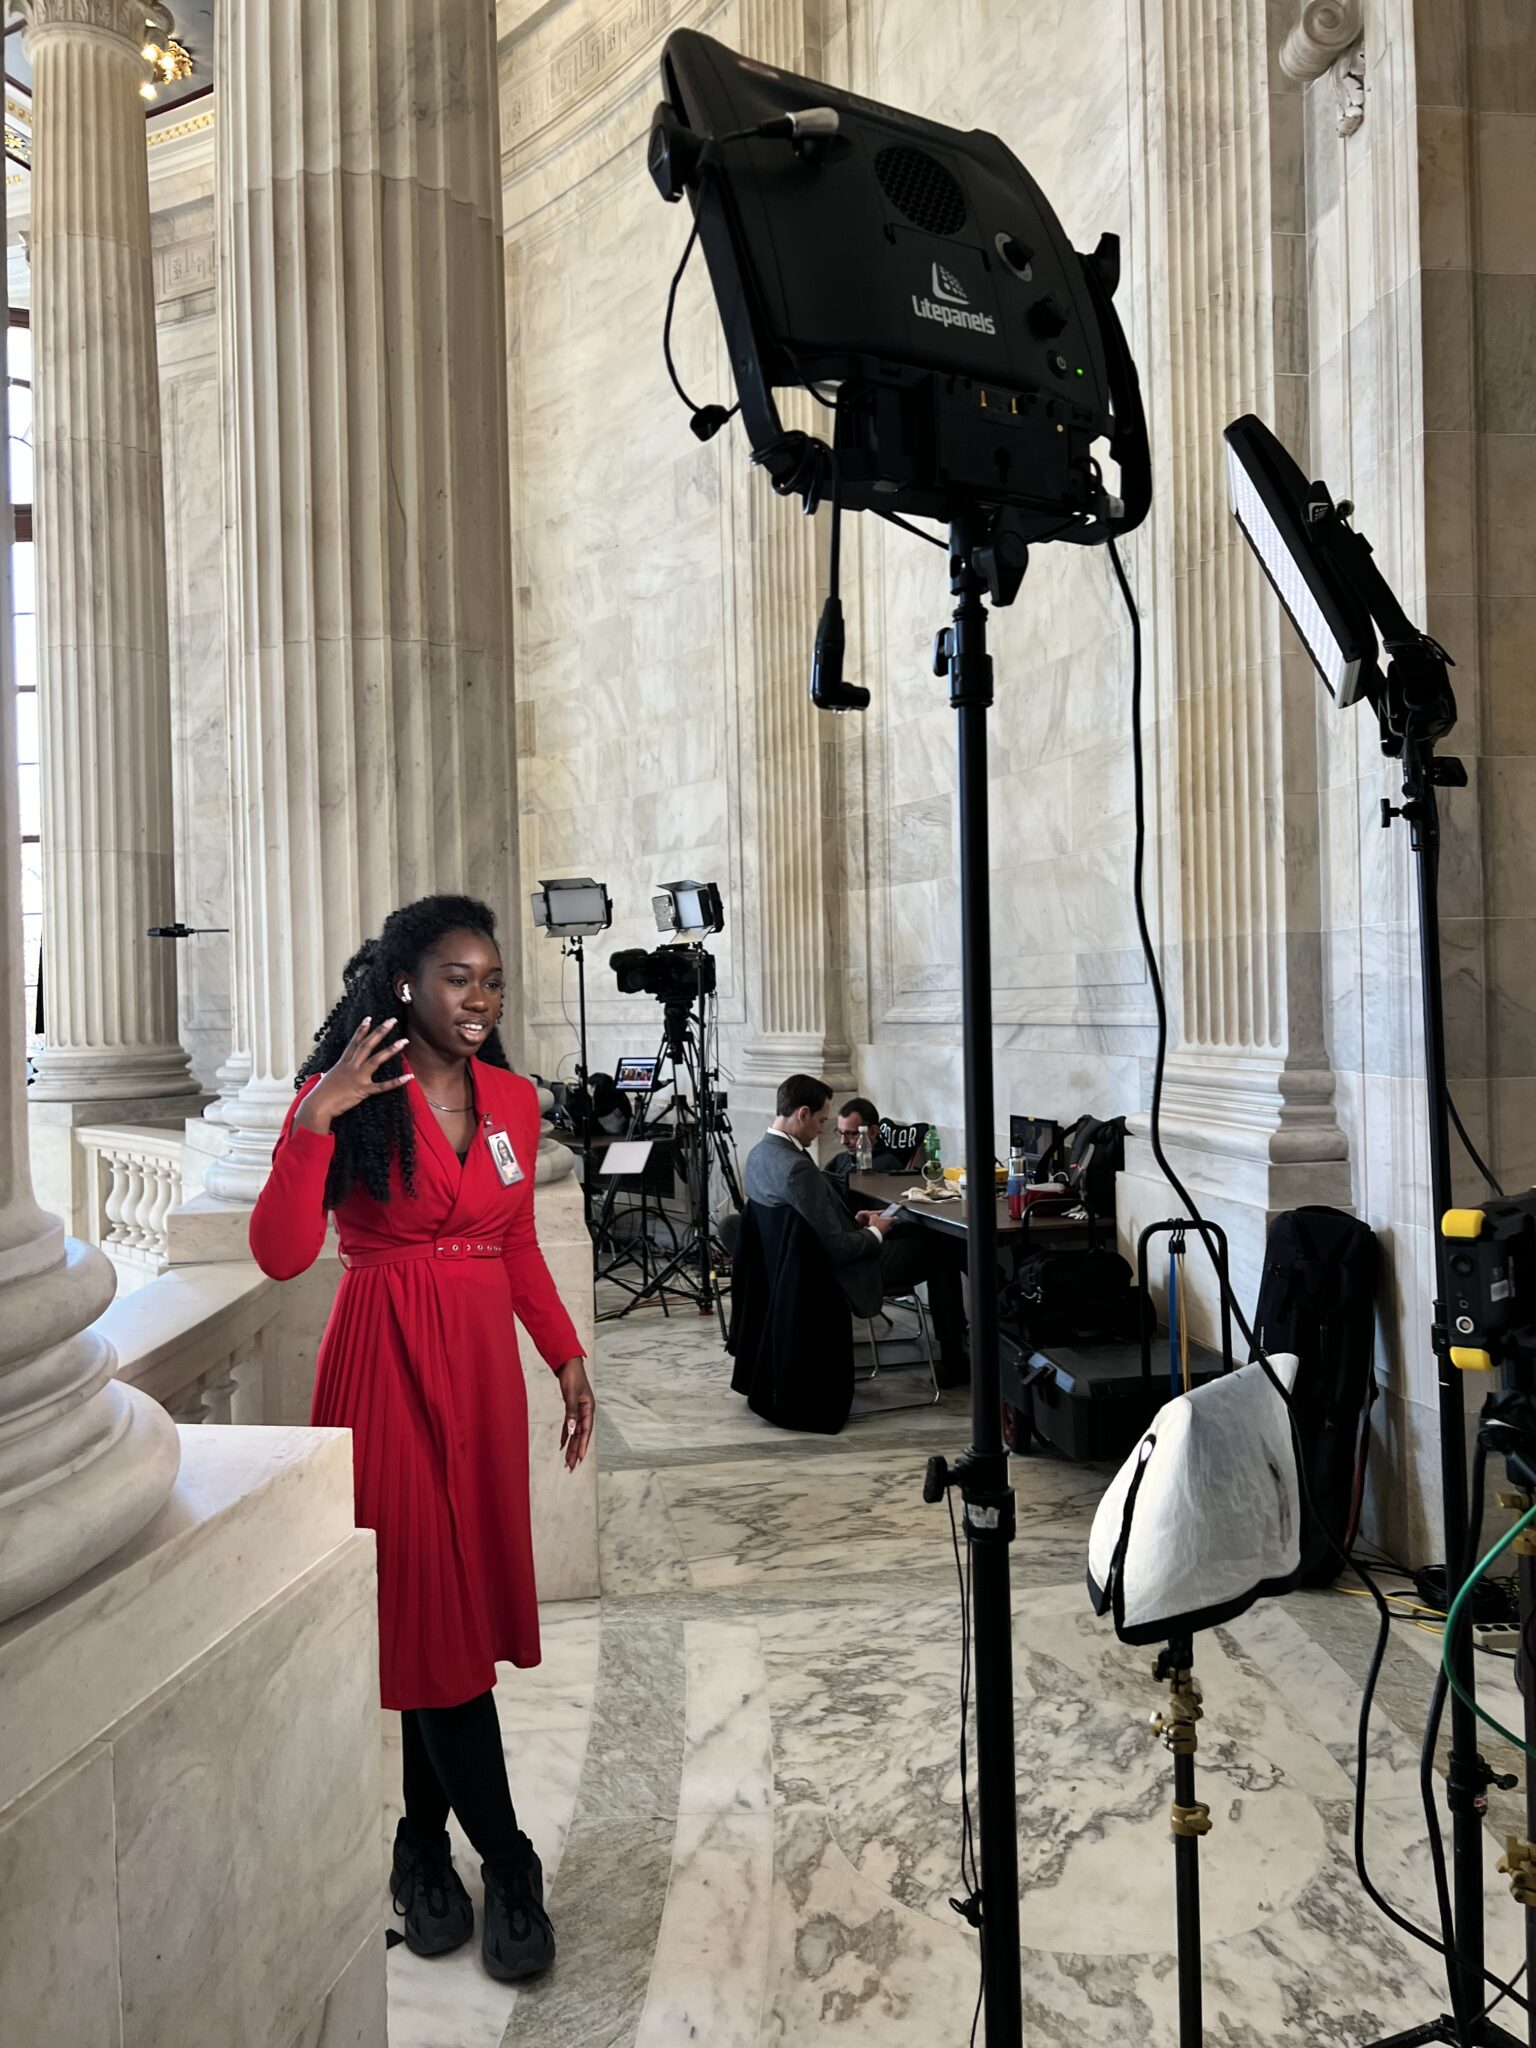 Nurielle Auguste reporting in the United States capitol building.